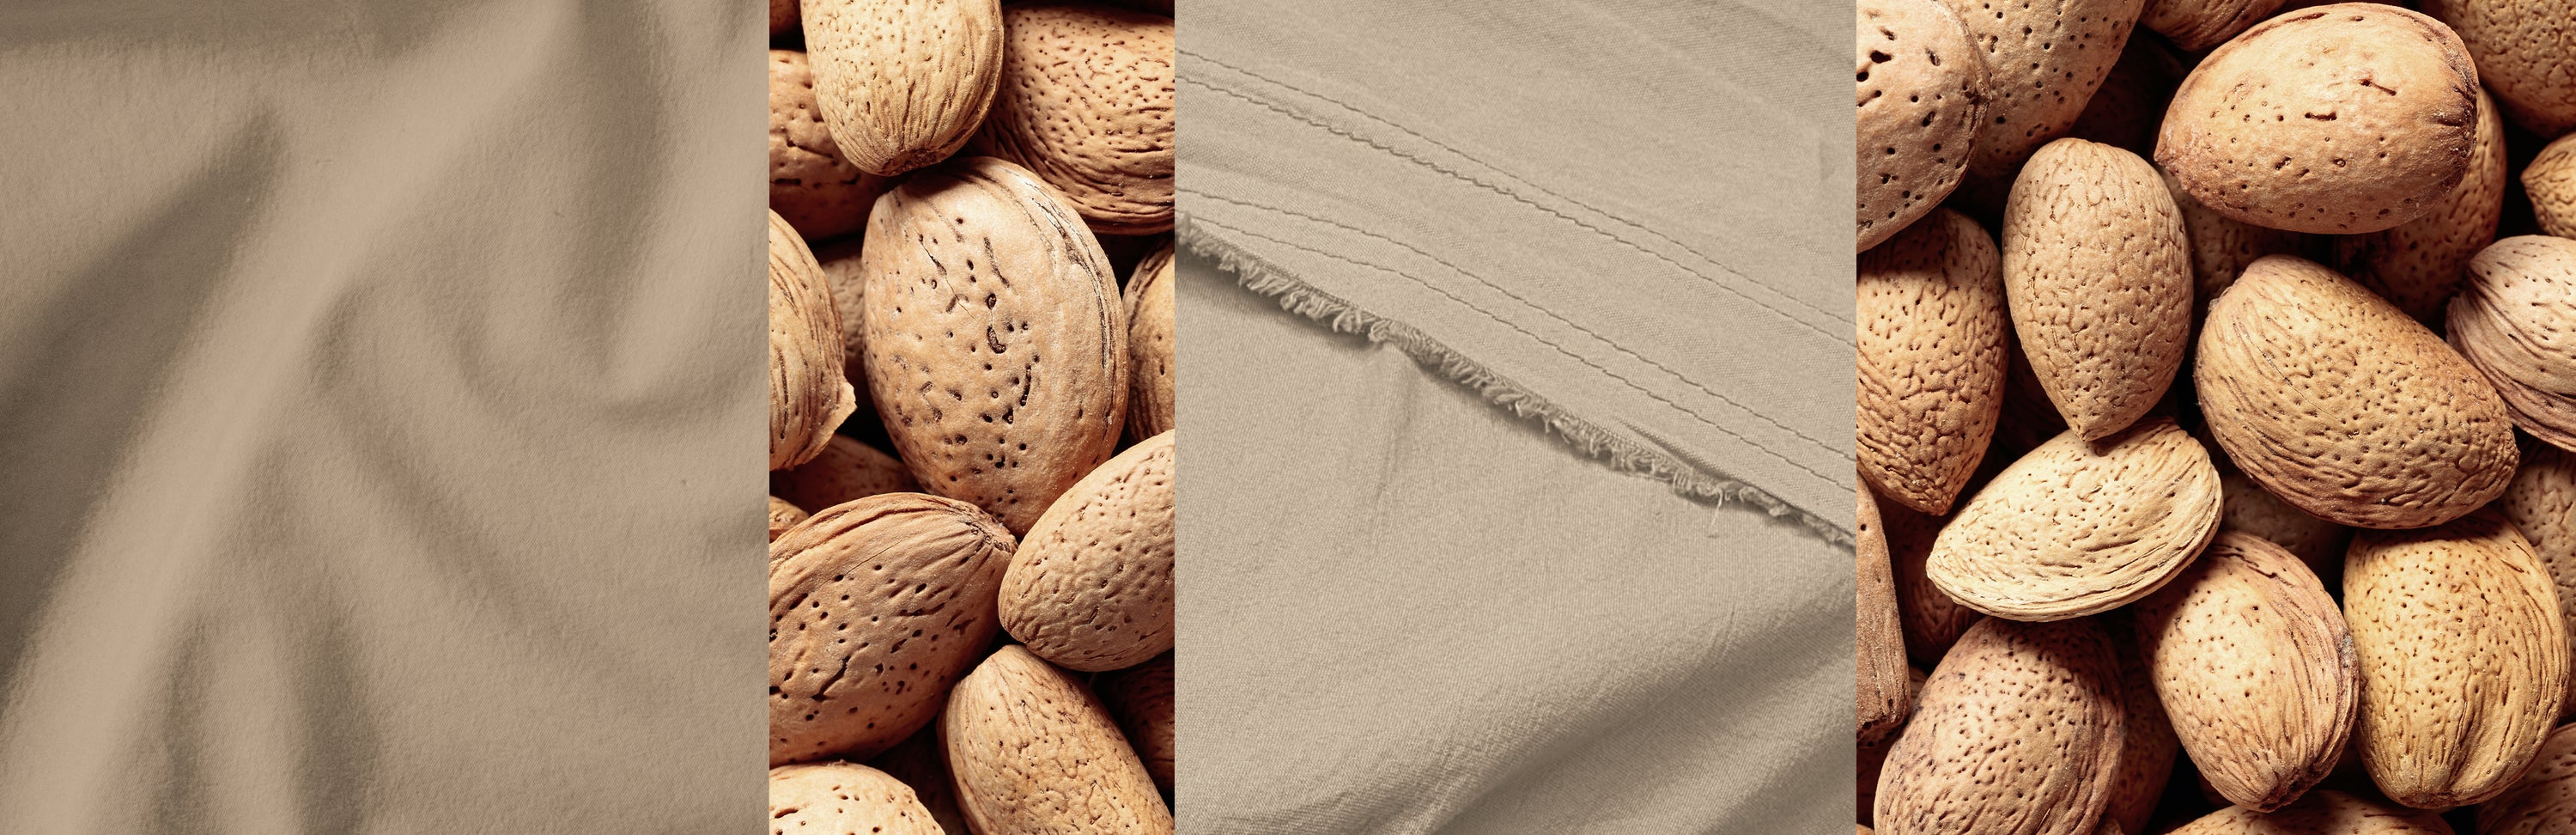 Images of almonds and Desert Sand fabrics 